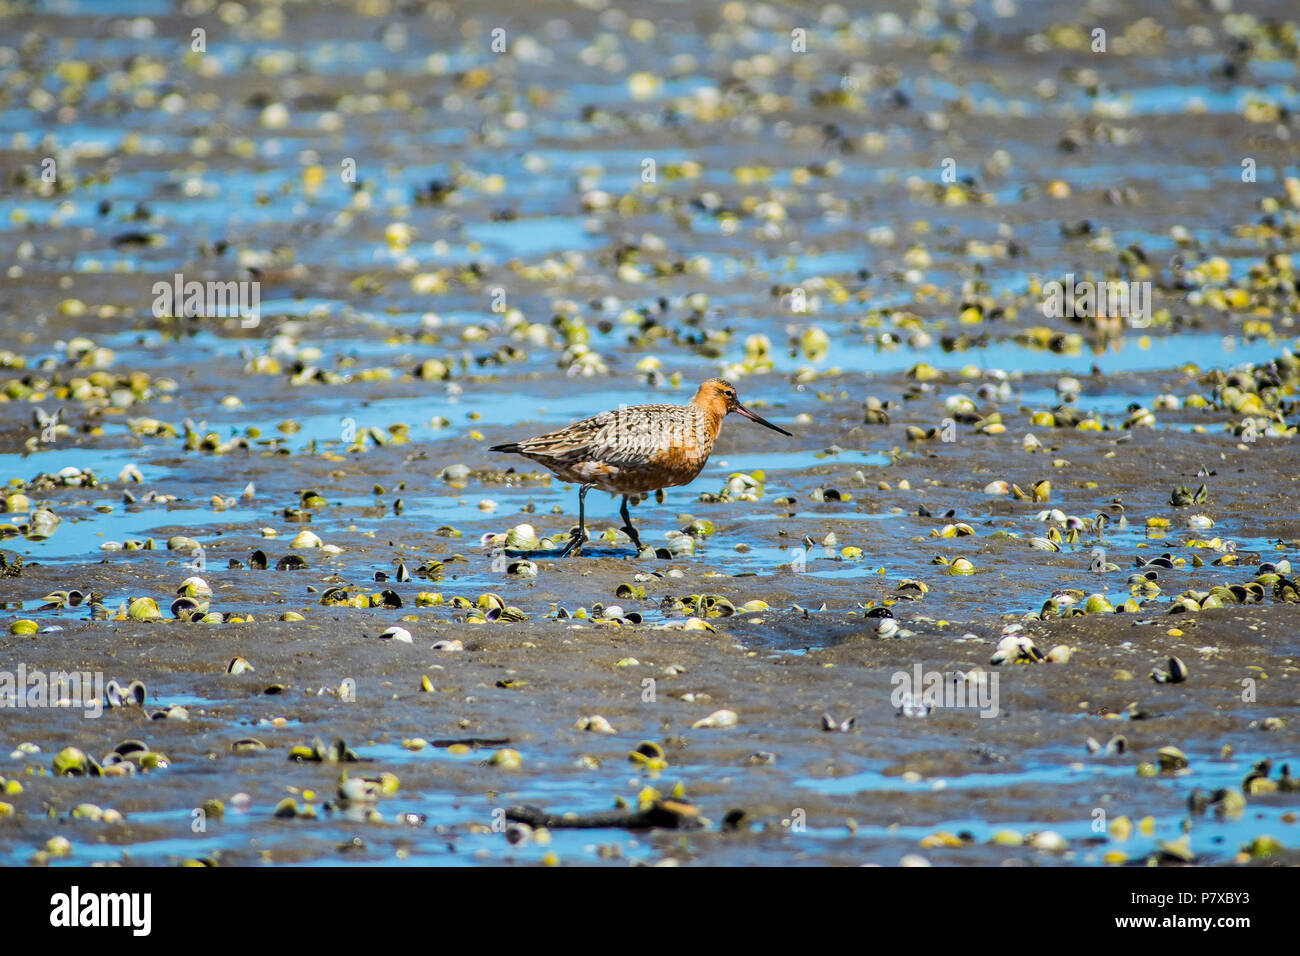 Spotted oyster catcher looks for food in estuary at low tide Stock Photo